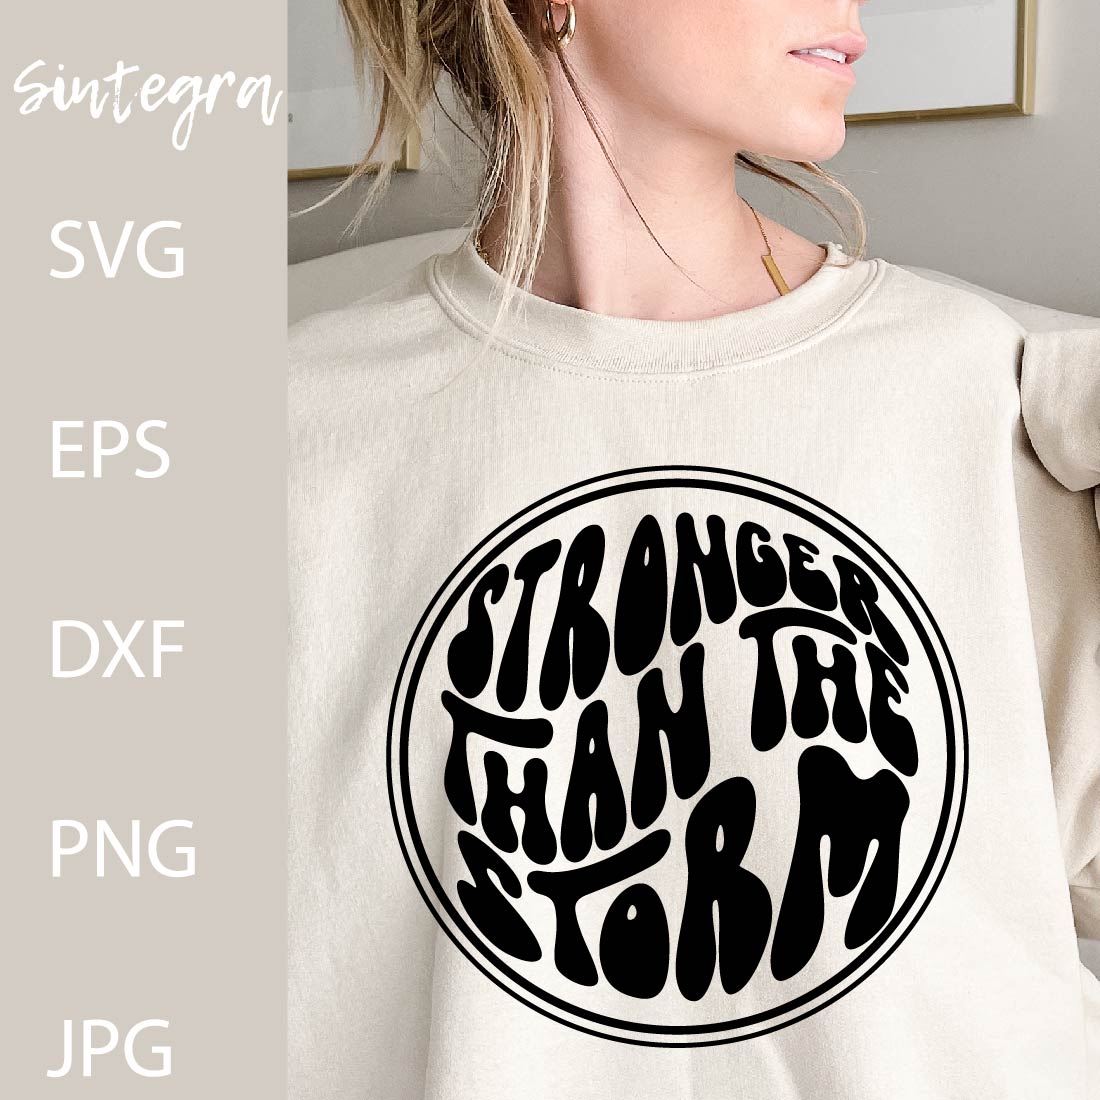 Stronger Than The Storm SVG Cut File created by Sintegra.